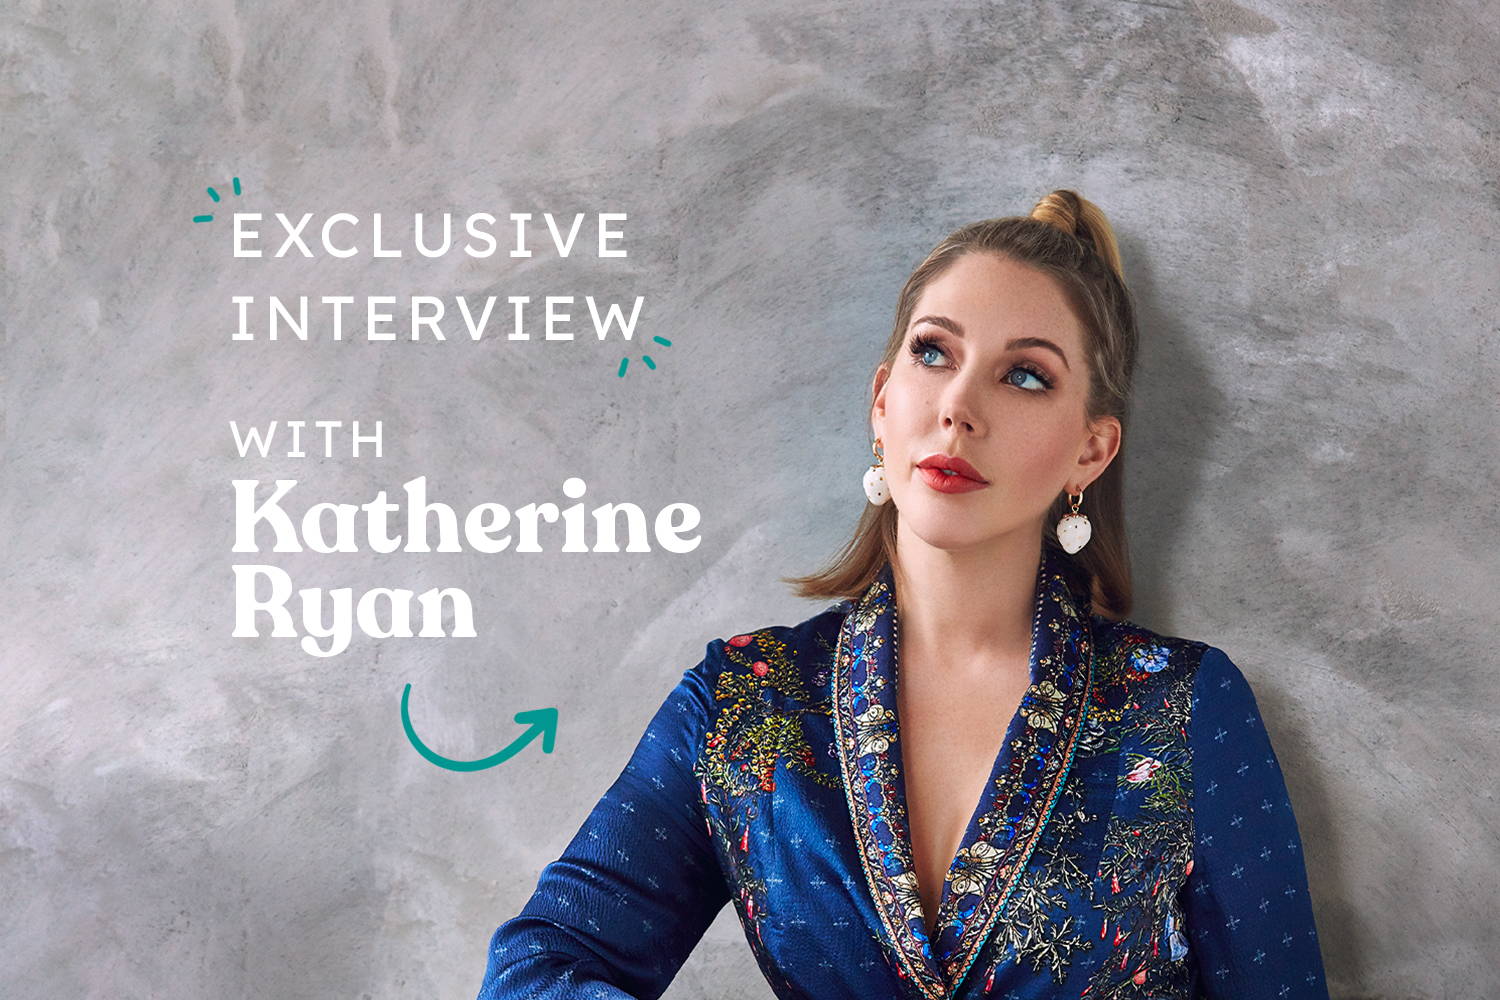  EXCLUSIVE: Katherine Ryan talks marriage, attempted break-ins and home decor 